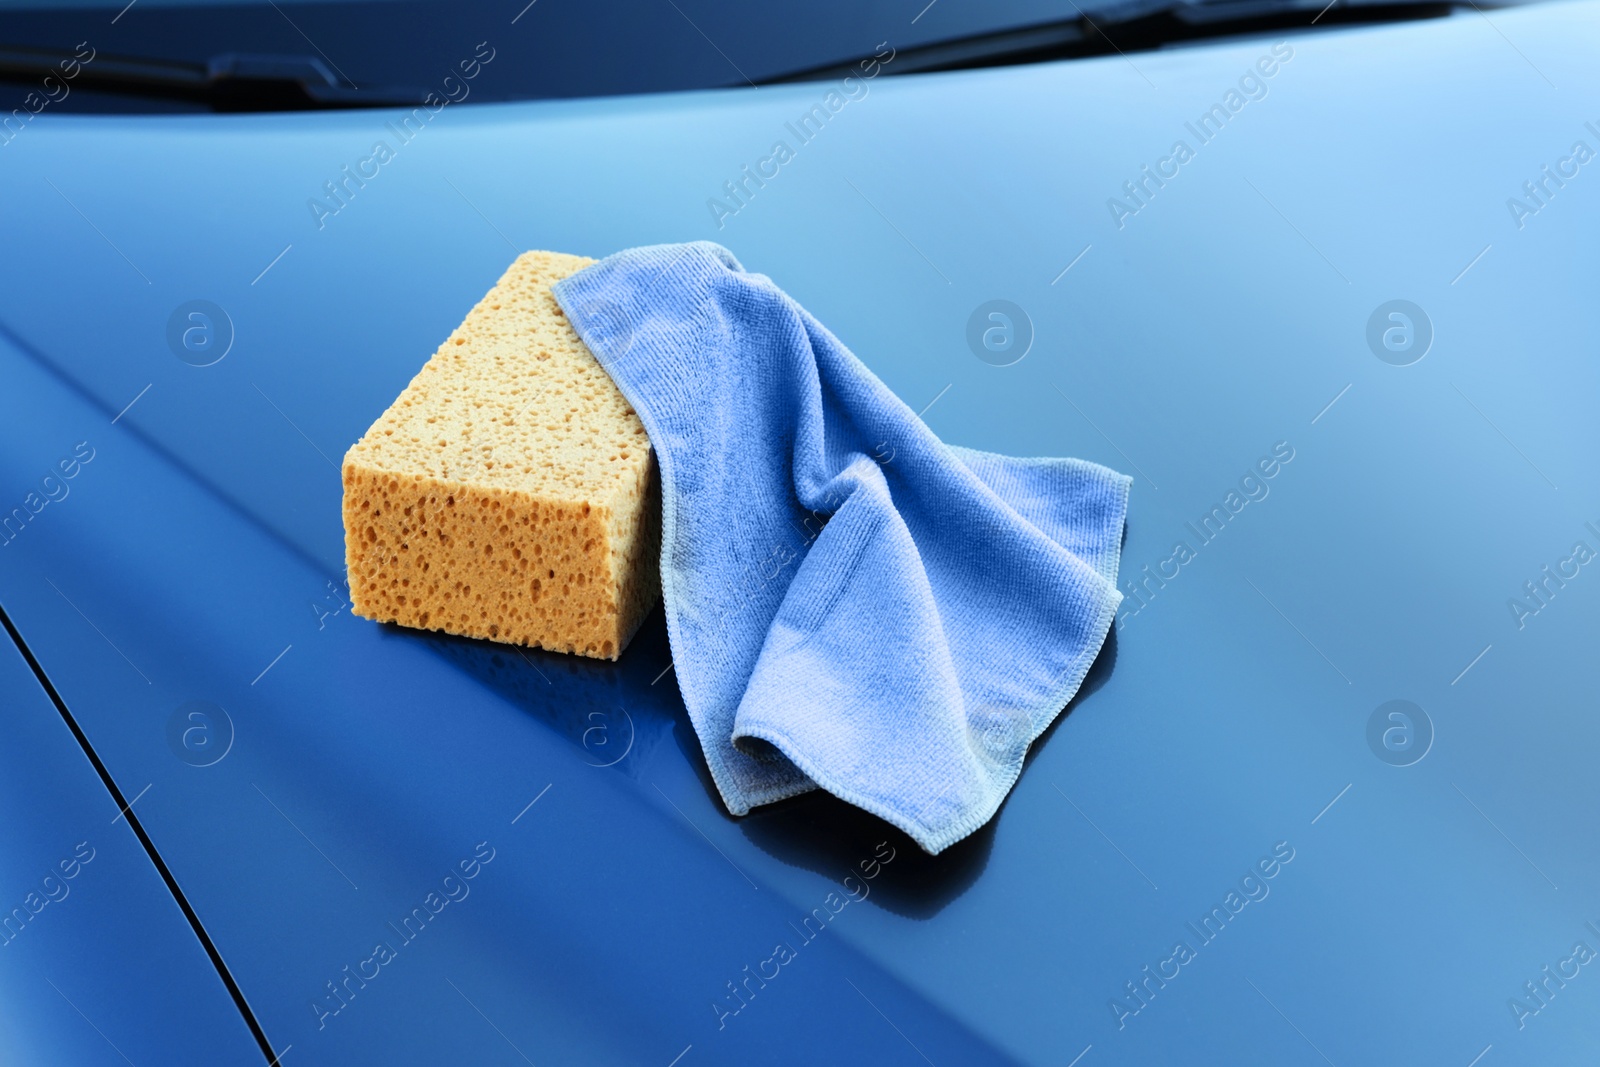 Photo of Sponge and rag on car hood. Cleaning products